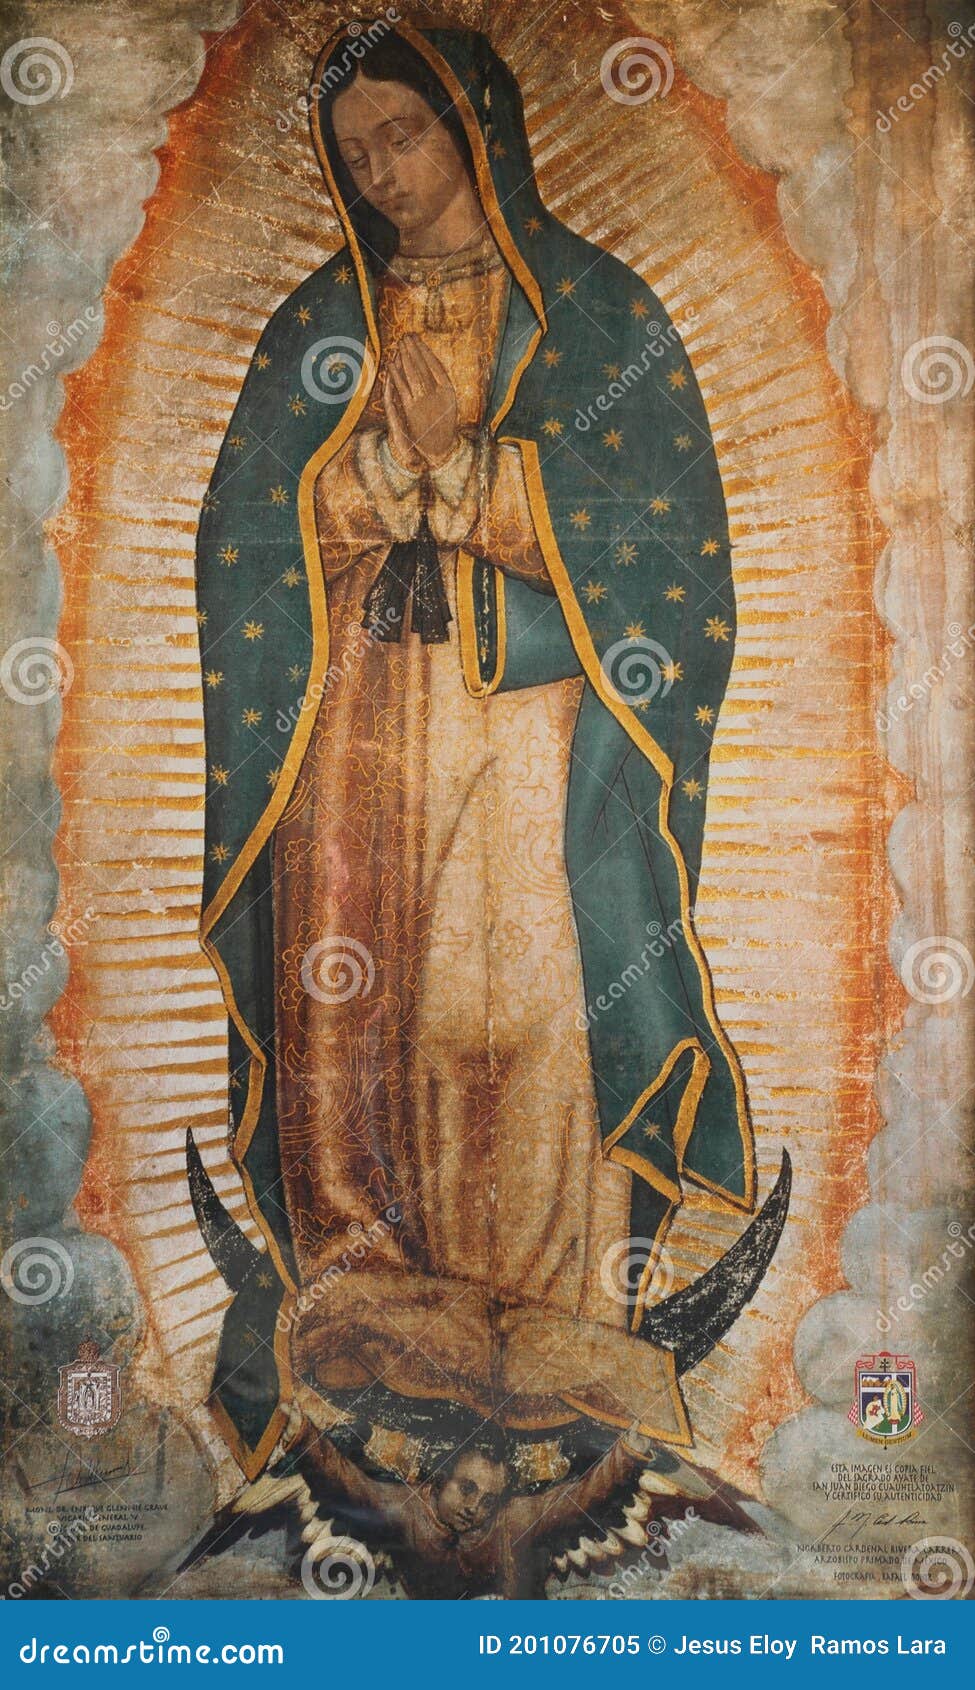 https://thumbs.dreamstime.com/z/image-virgin-mary-basilica-guadalupe-mexico-v-image-virgin-mary-guadalupe-basilica-guadalupe-mexico-201076705.jpg